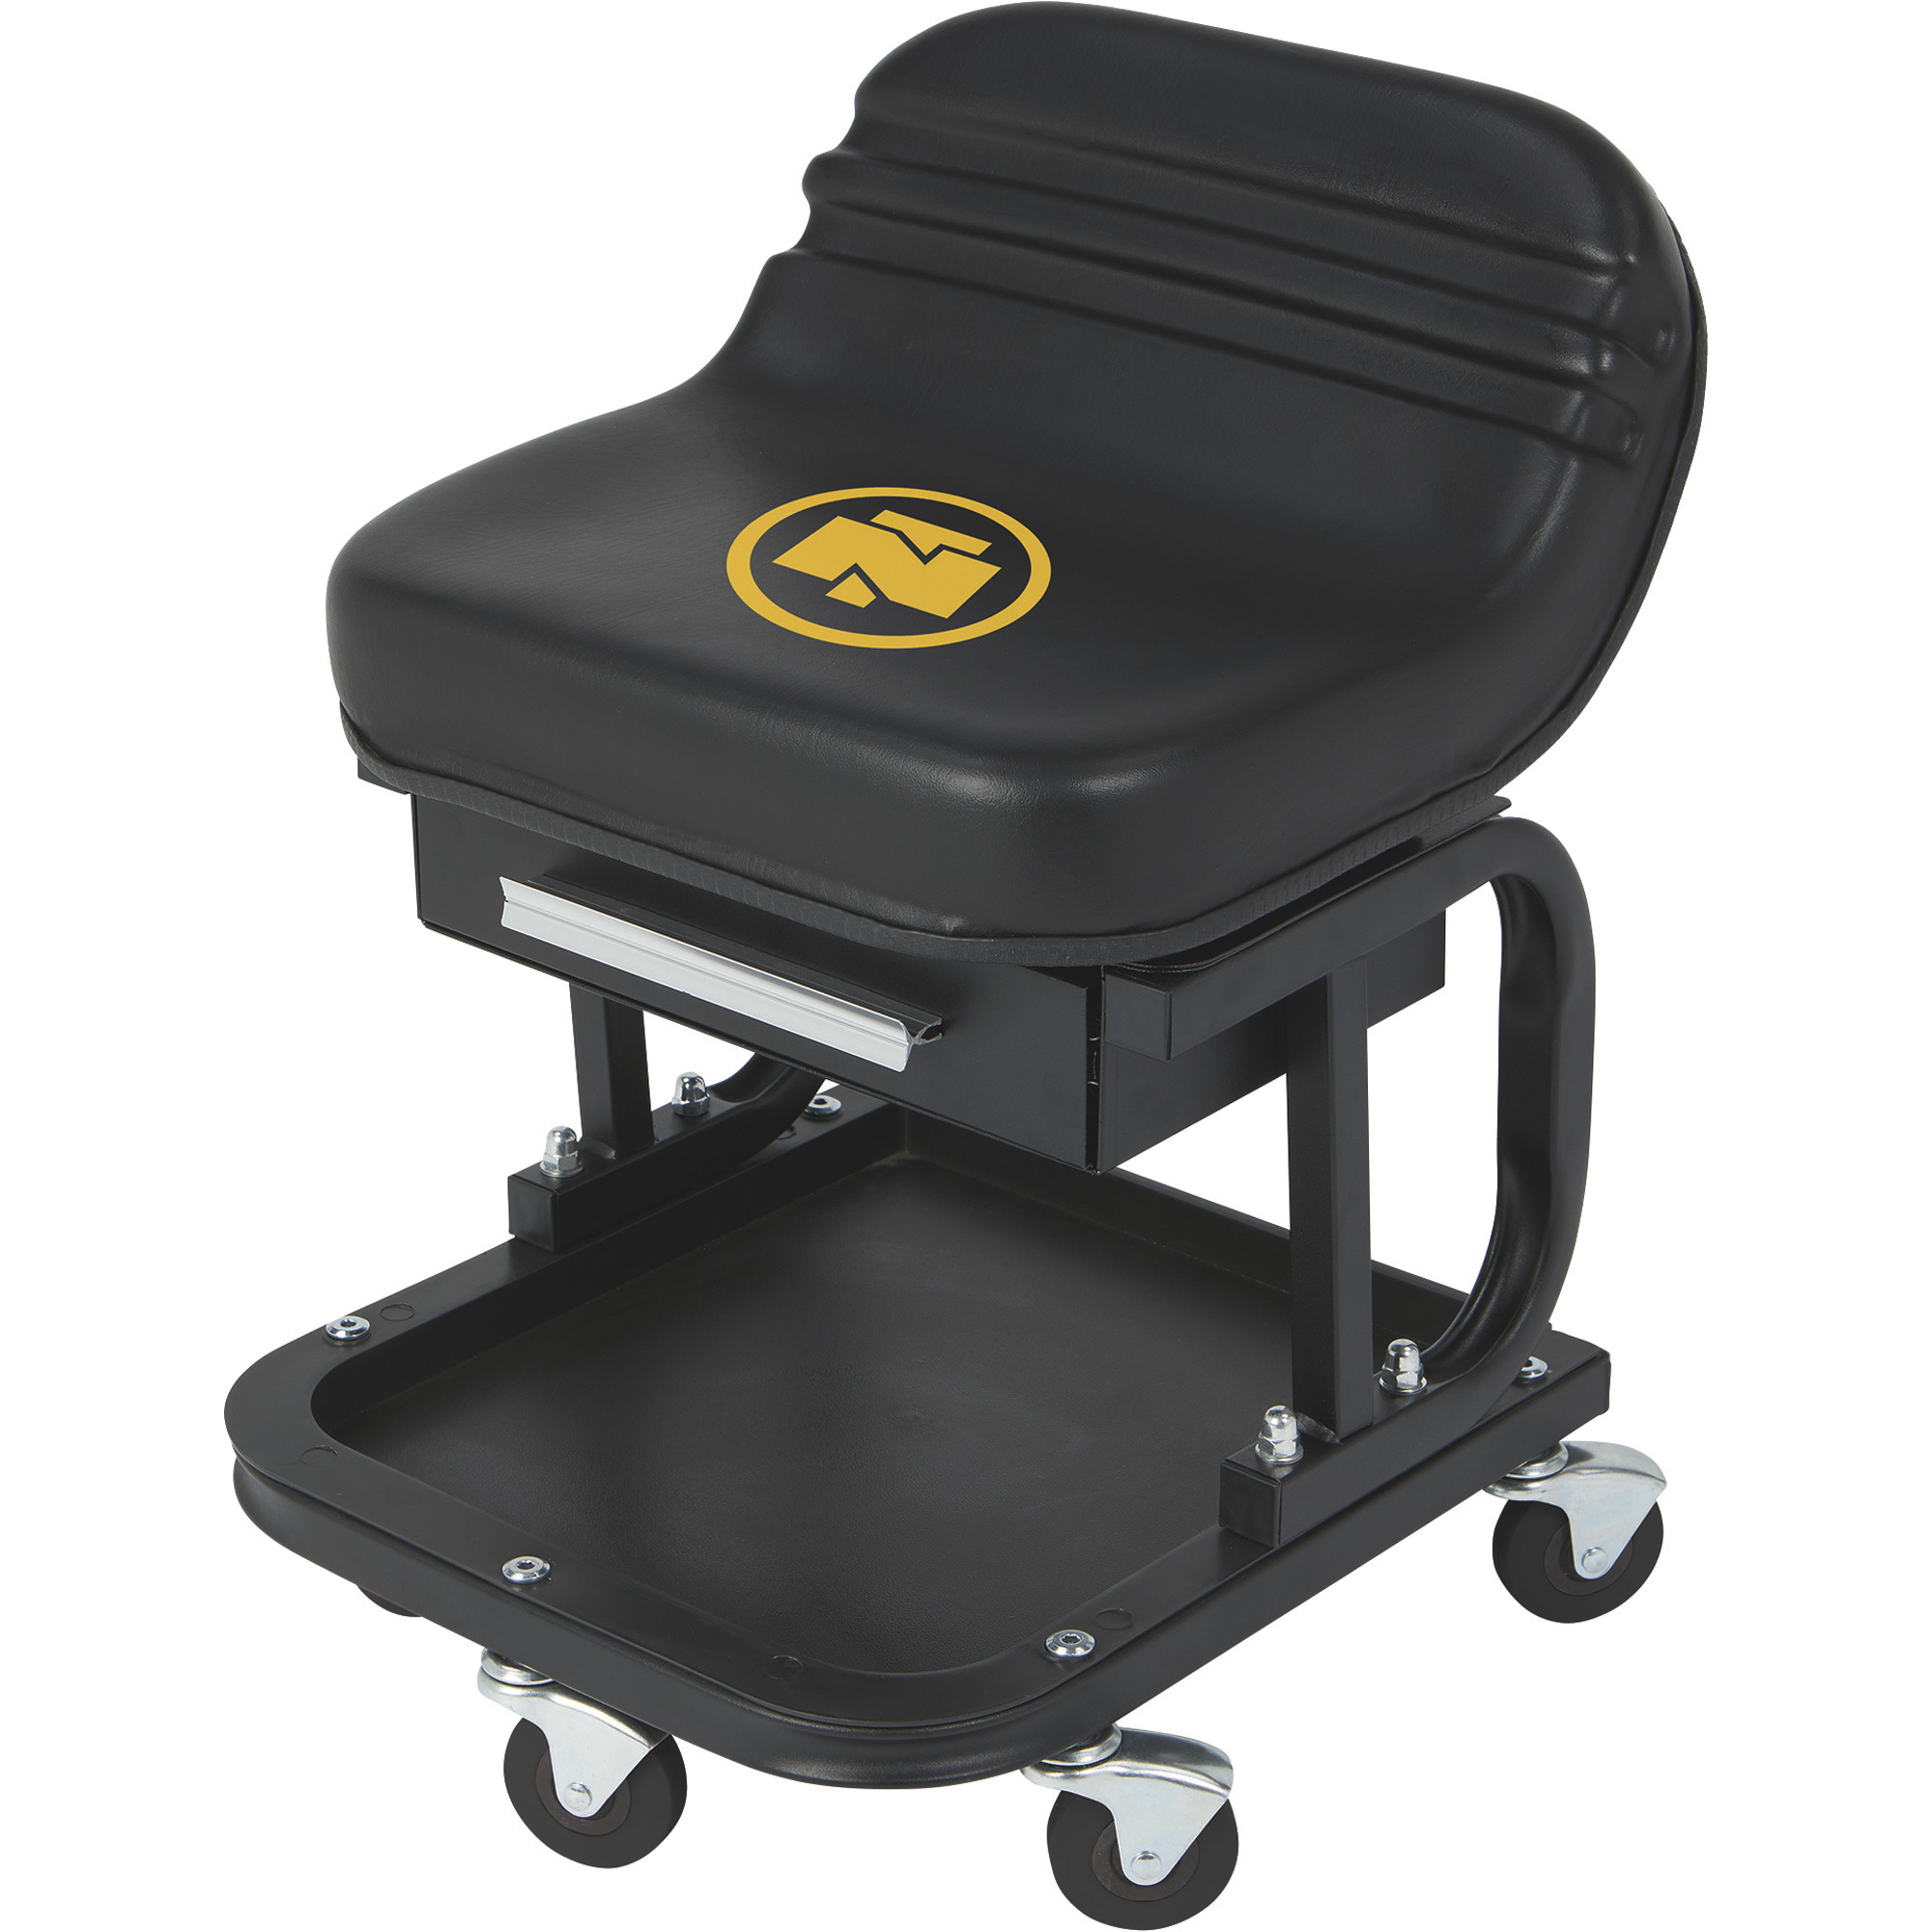 Northern Tool + Equipment Mechanic's Roller Seat with Built-in Storage, 300-Lb. Capacity